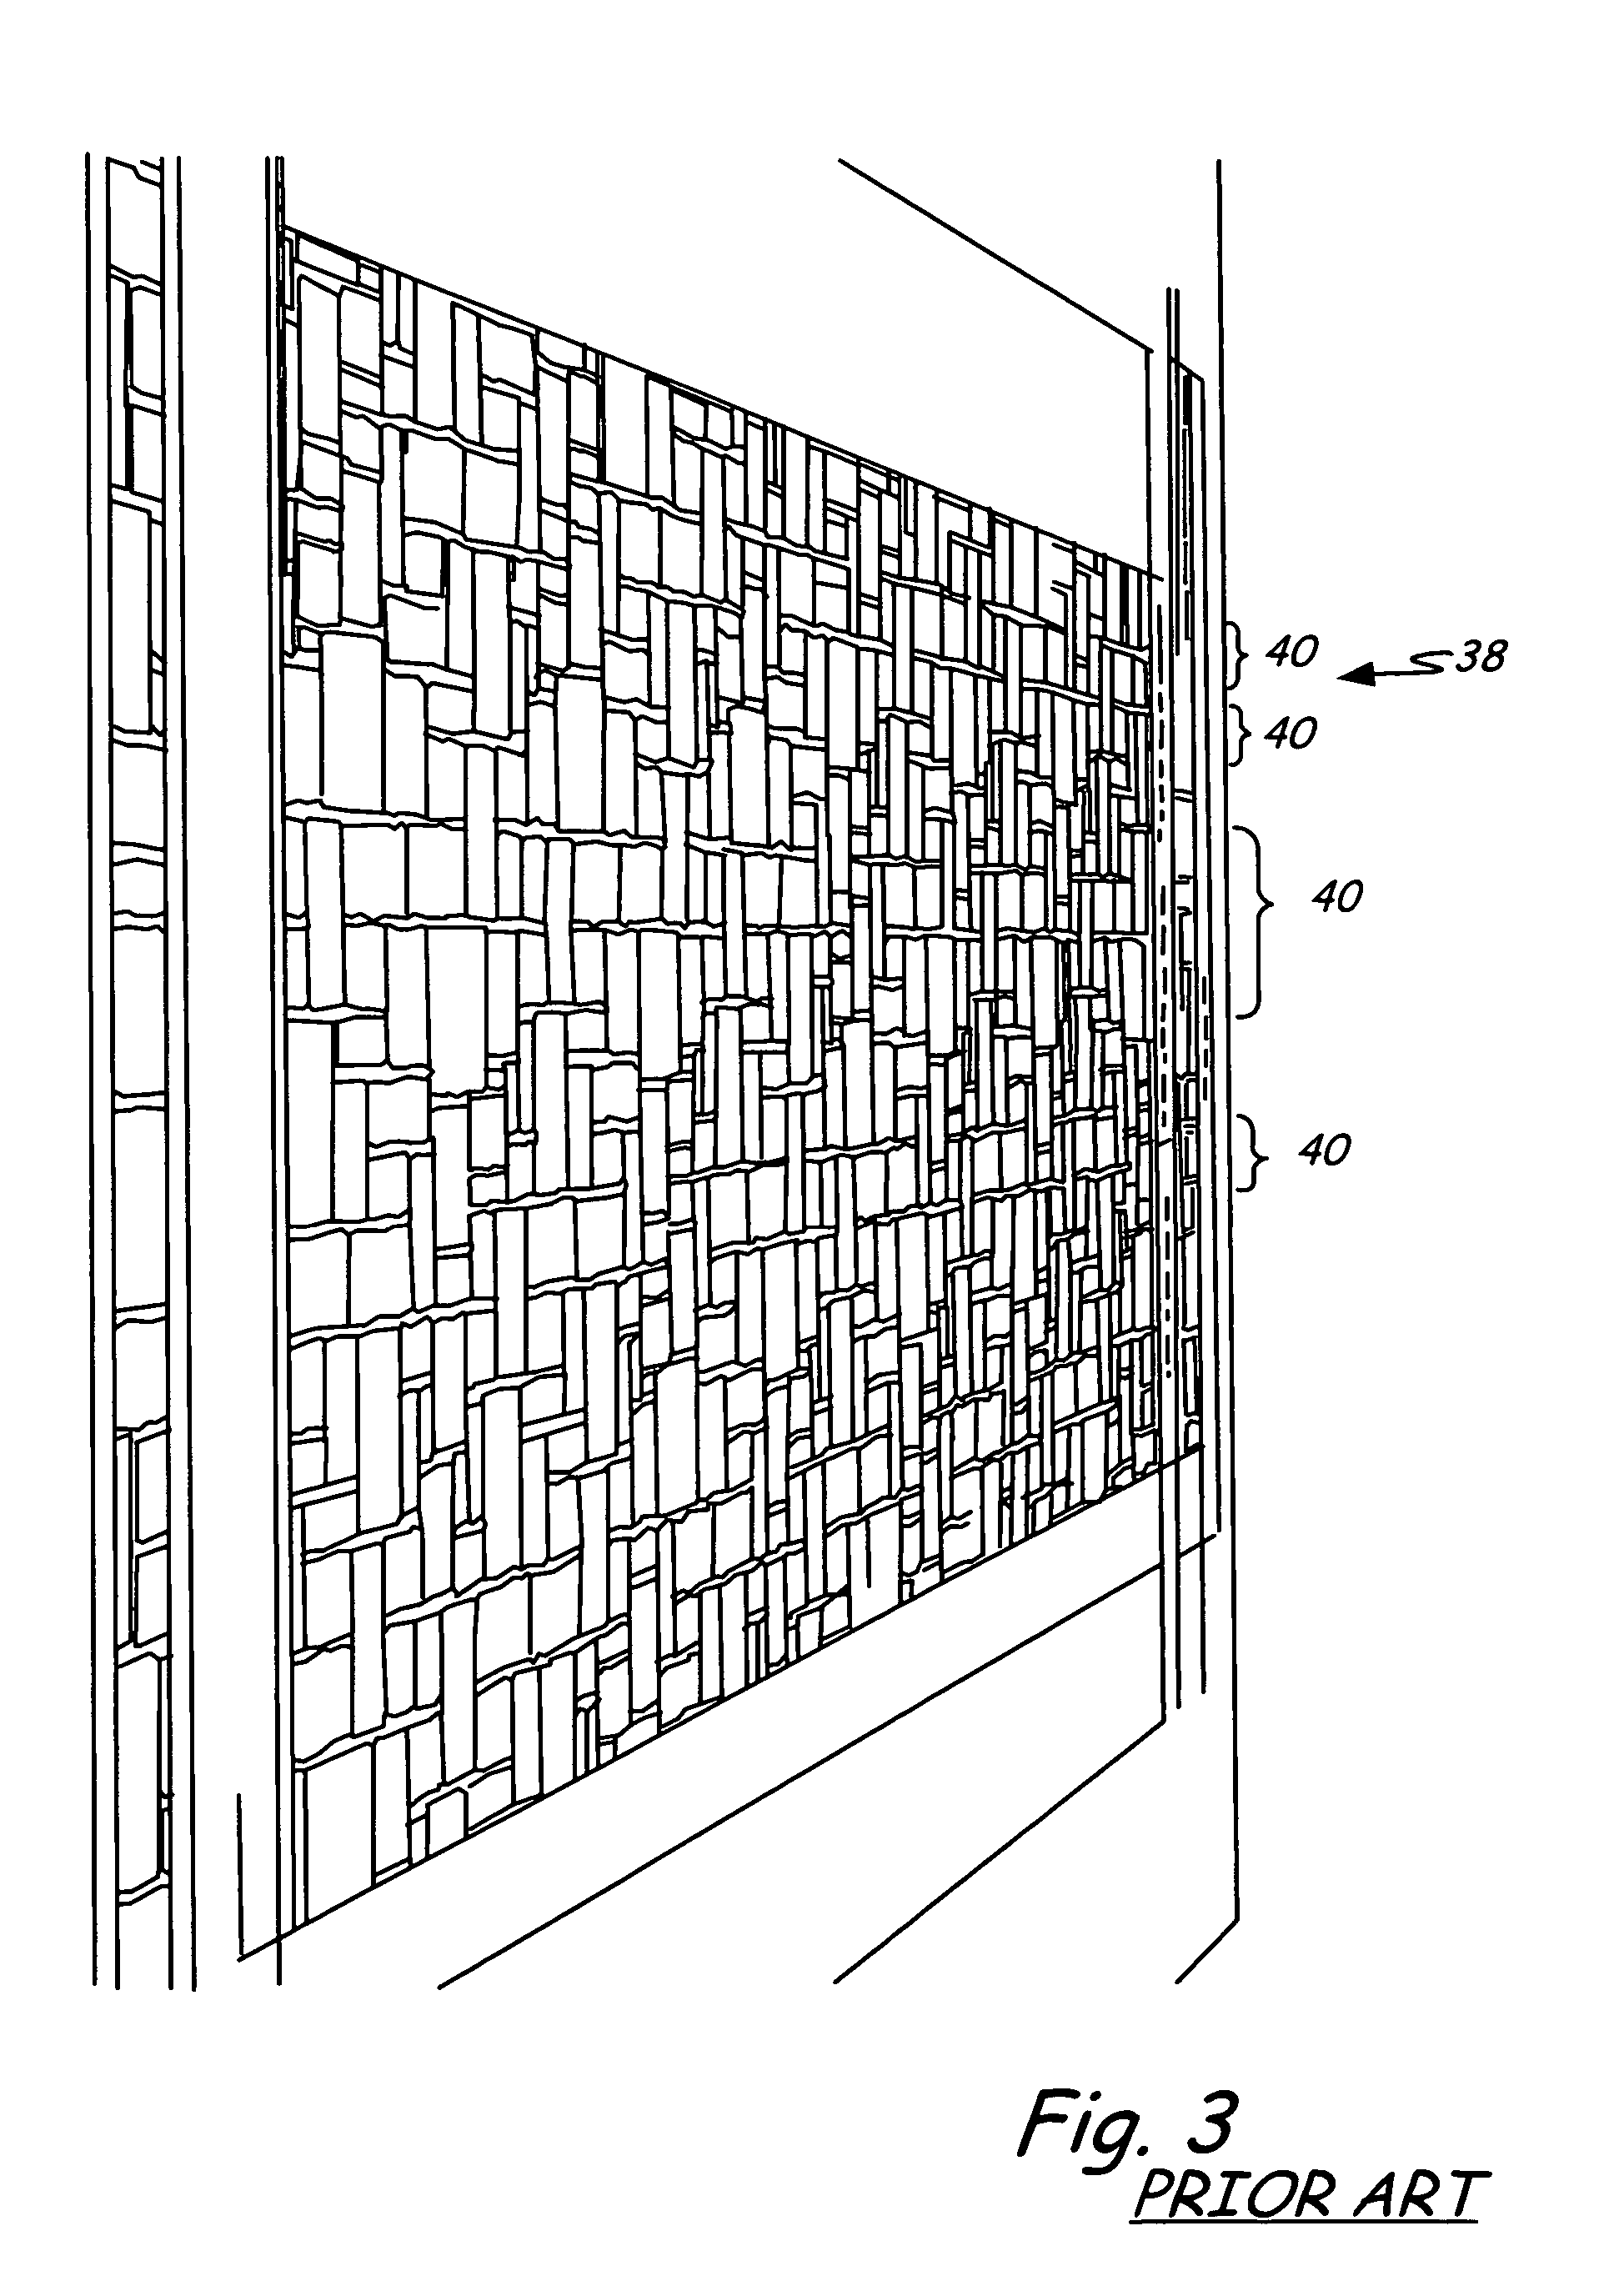 Form liner with connection regions having a plurality of linear segments for creating a realistic stone wall pattern